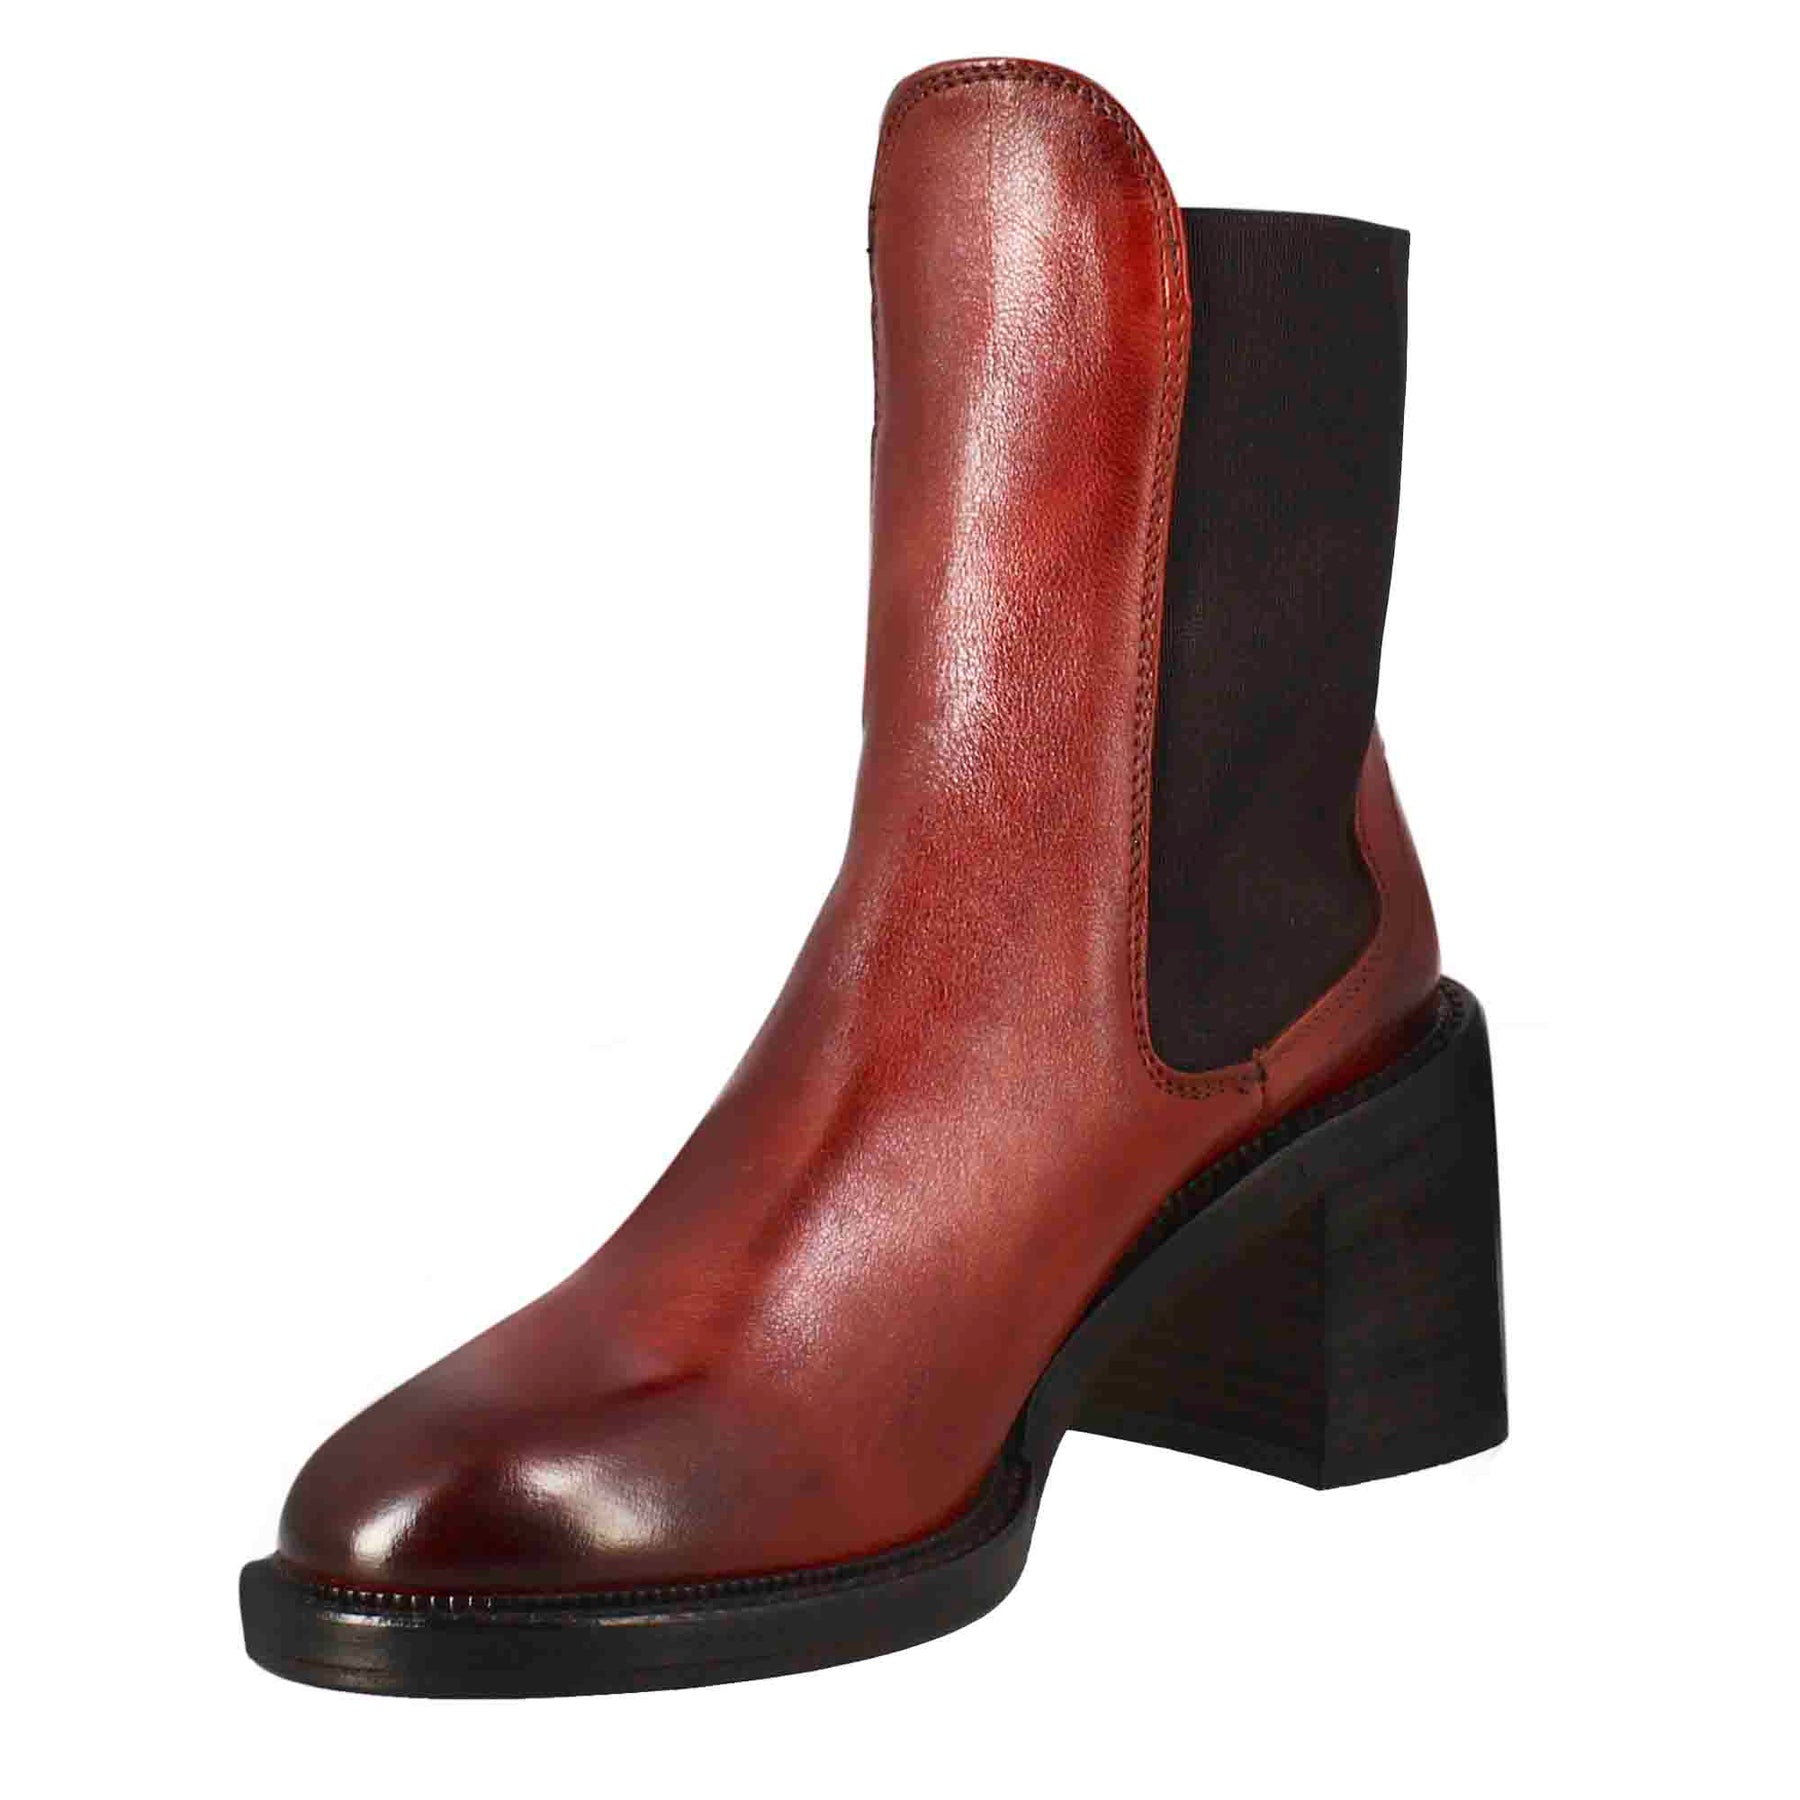 Women's chelsea boot with heel in red washed leather